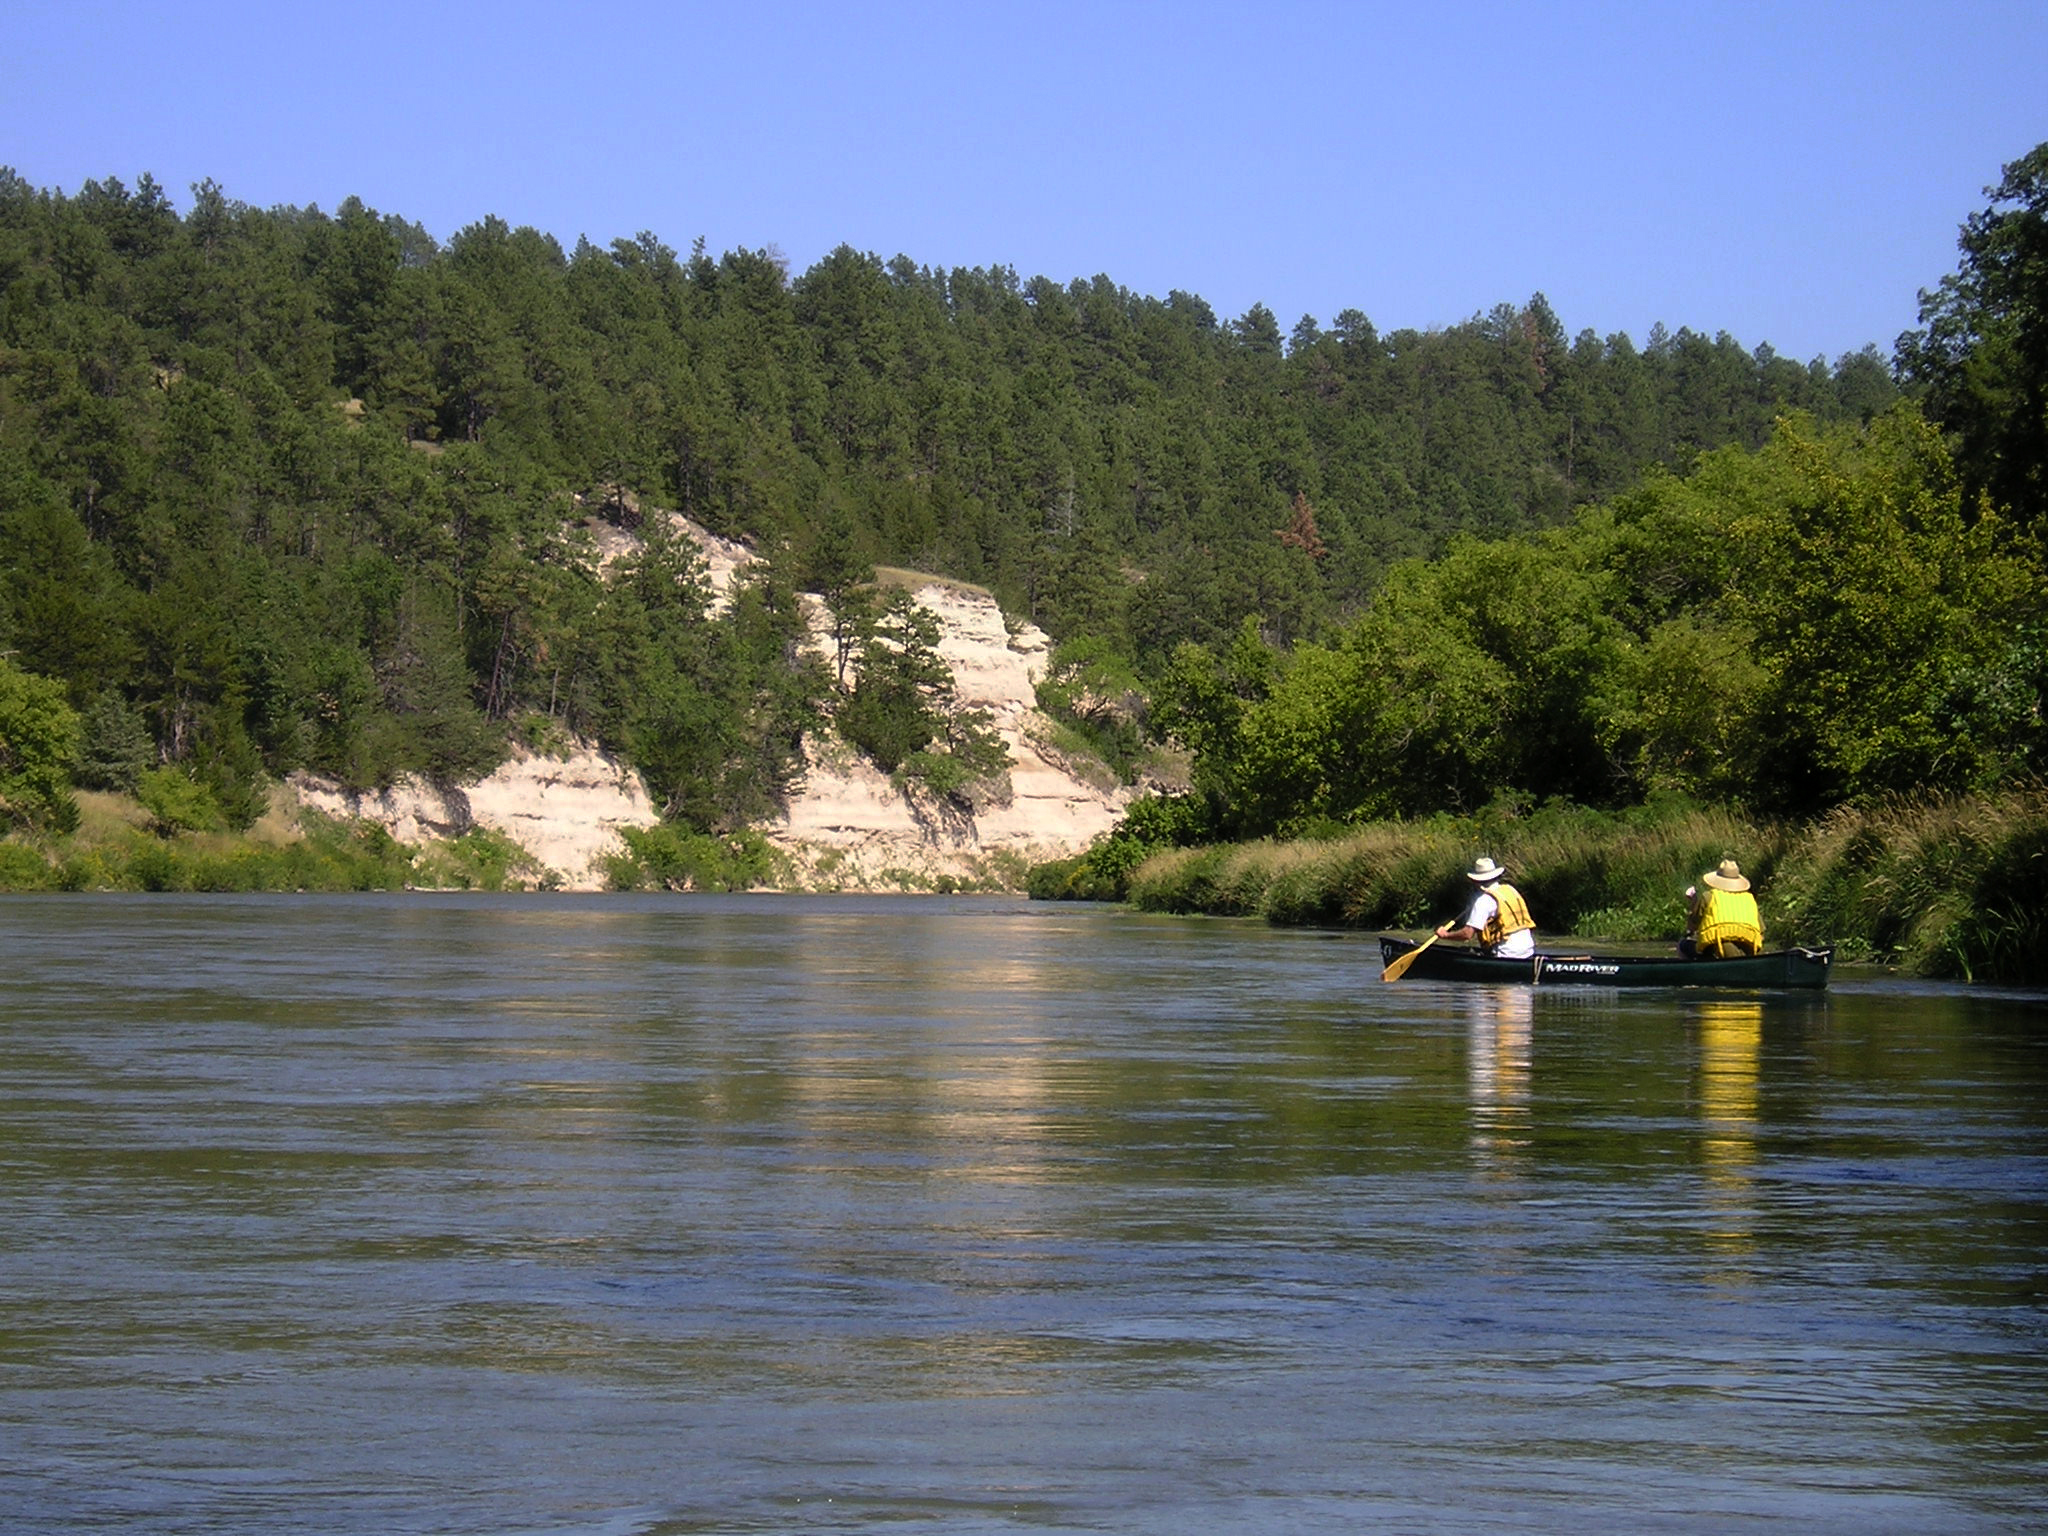 Two people in one canoe paddle along the bluffs of the Niobrara NSR.